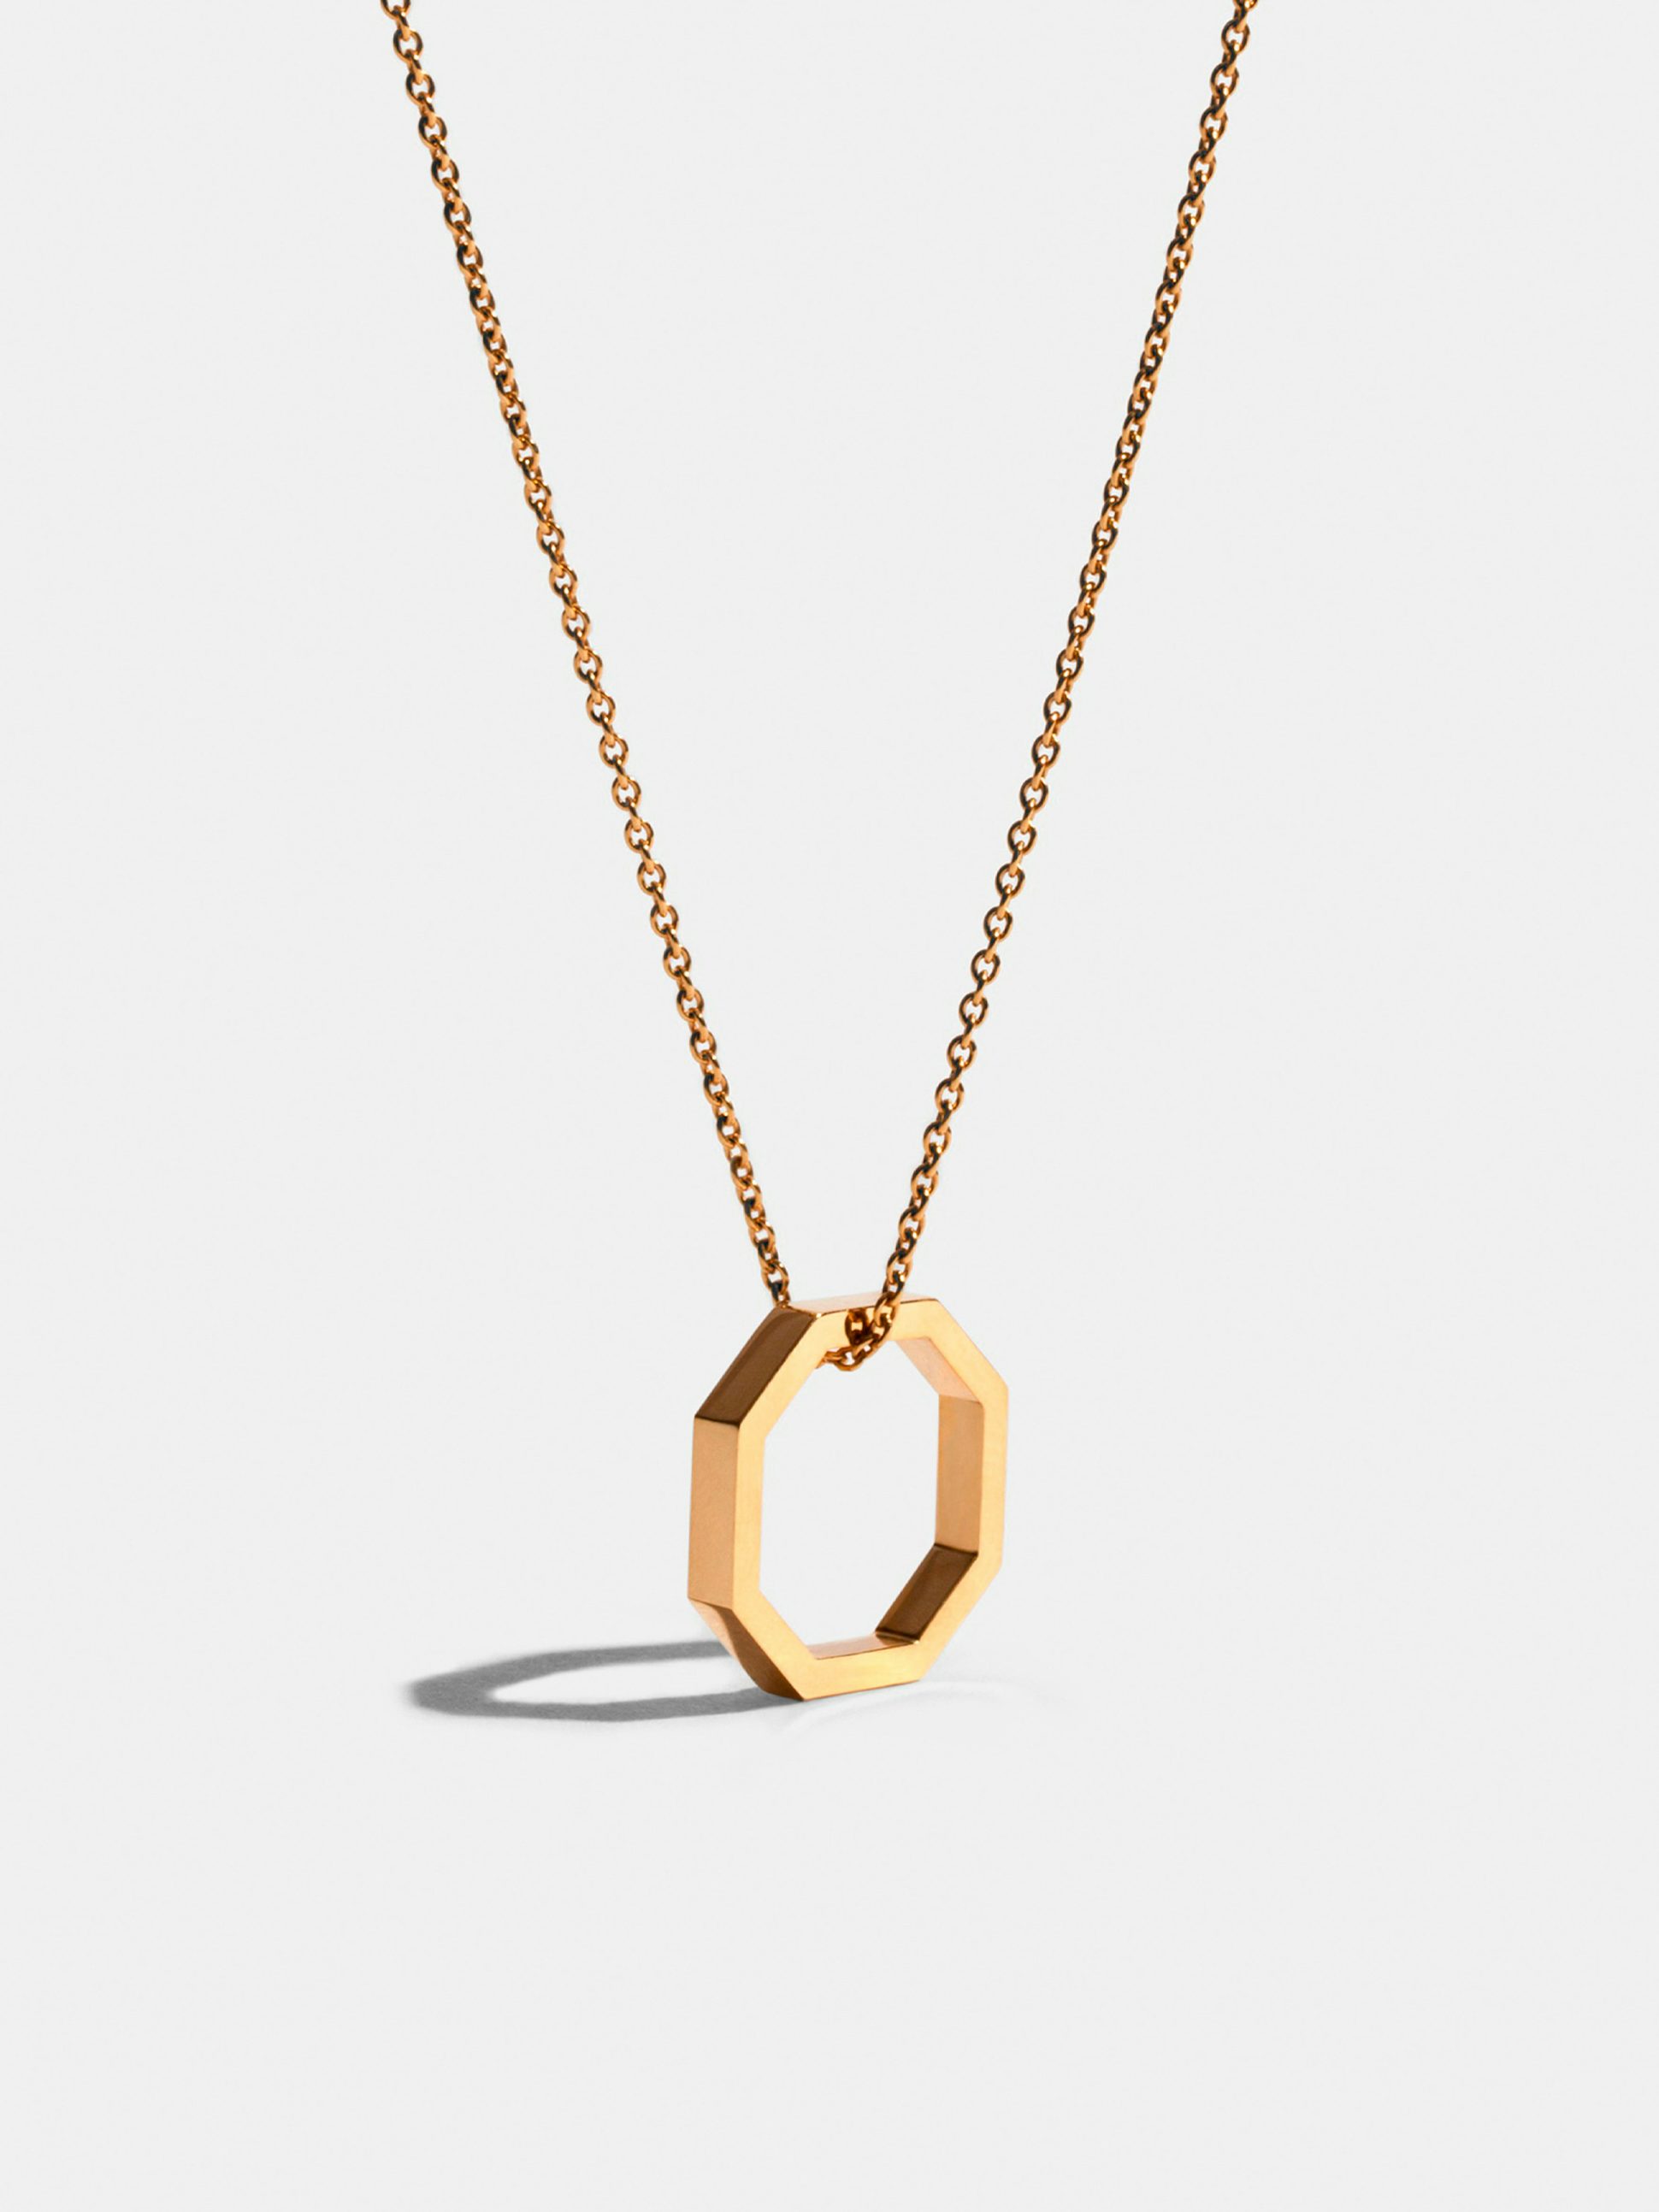 Octogone 14mm pendant in 18k Fairmined ethical yellow gold, on a chain.